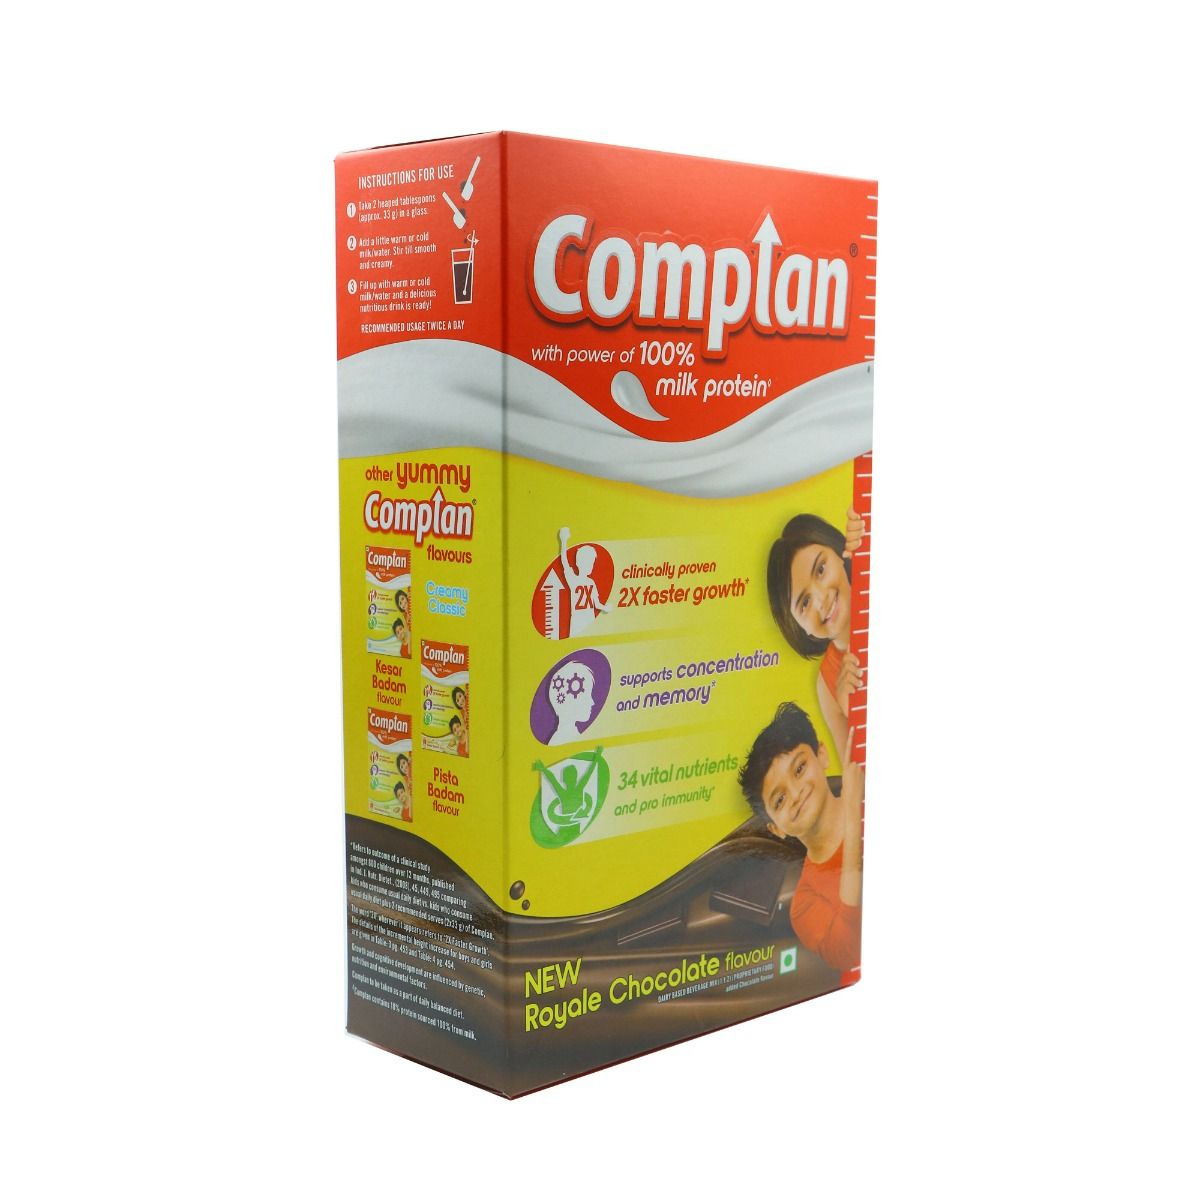 Buy Complan Royale Chocolate Flavour Health & Nutrition Drink, 1 kg Refill Pack Online